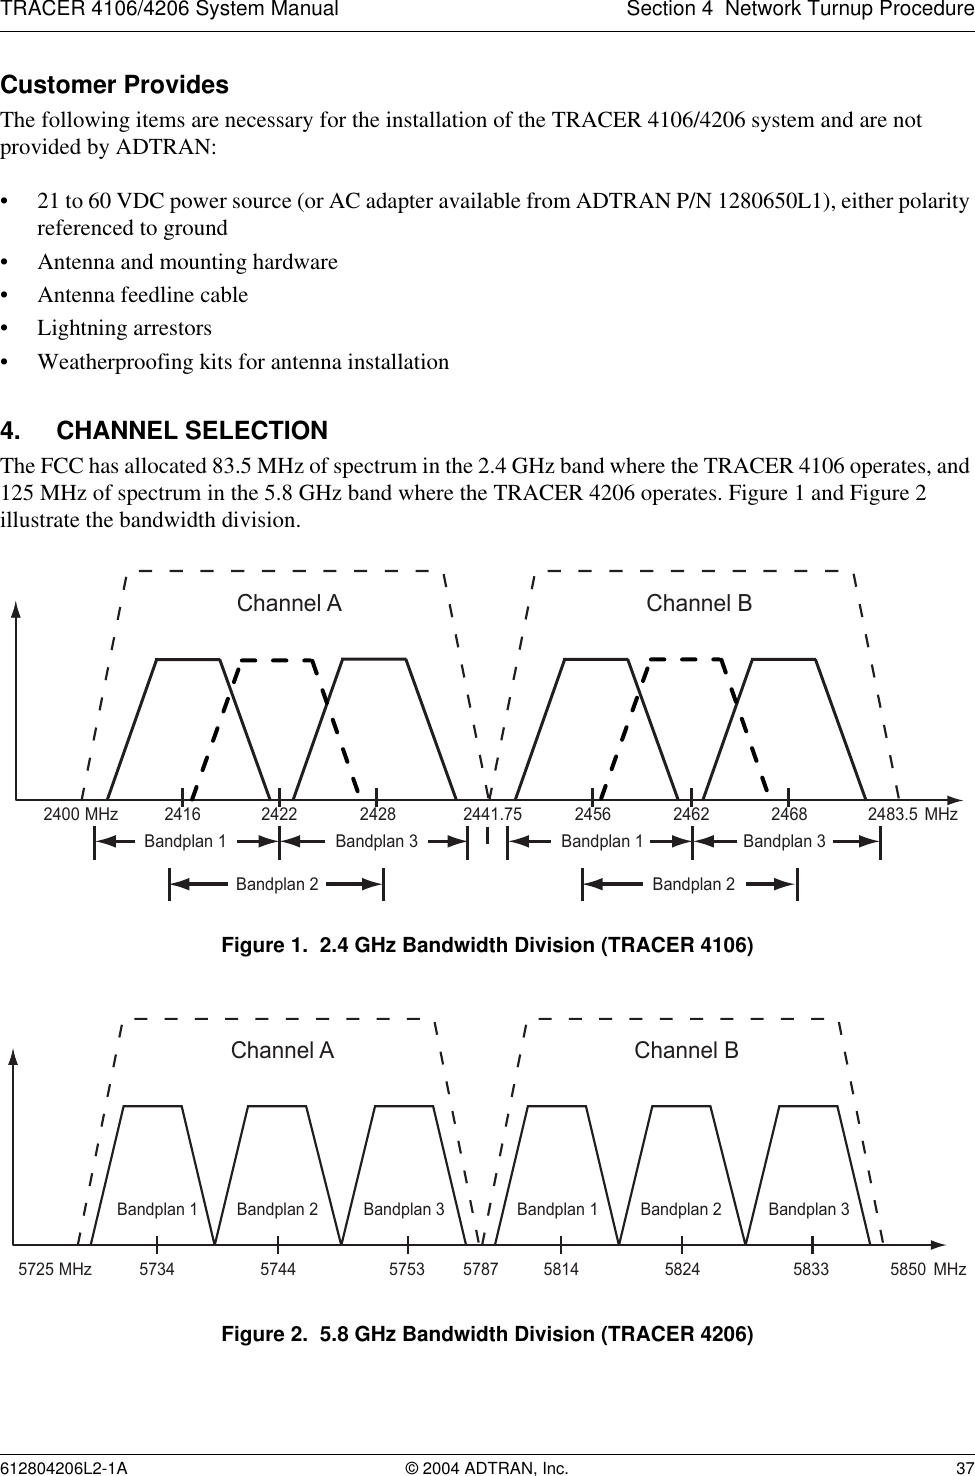 TRACER 4106/4206 System Manual Section 4  Network Turnup Procedure612804206L2-1A © 2004 ADTRAN, Inc. 37Customer ProvidesThe following items are necessary for the installation of the TRACER 4106/4206 system and are not provided by ADTRAN:• 21 to 60 VDC power source (or AC adapter available from ADTRAN P/N 1280650L1), either polarity referenced to ground• Antenna and mounting hardware• Antenna feedline cable• Lightning arrestors• Weatherproofing kits for antenna installation4. CHANNEL SELECTIONThe FCC has allocated 83.5 MHz of spectrum in the 2.4 GHz band where the TRACER 4106 operates, and 125 MHz of spectrum in the 5.8 GHz band where the TRACER 4206 operates. Figure 1 and Figure 2 illustrate the bandwidth division. Figure 1.  2.4 GHz Bandwidth Division (TRACER 4106)Figure 2.  5.8 GHz Bandwidth Division (TRACER 4206)Channel!A2416 2441.752422 24282400 MHz 2483.5!MHzBandplan!3Bandplan!2Bandplan!1Channel!B2456 2462 2468Bandplan!3Bandplan!2Bandplan!1Channel!A57345725 5787 58505744 5753MHz MHzBandplan!3Bandplan!2Bandplan!1Channel!B5814 5824 5833Bandplan!3Bandplan!2Bandplan!1